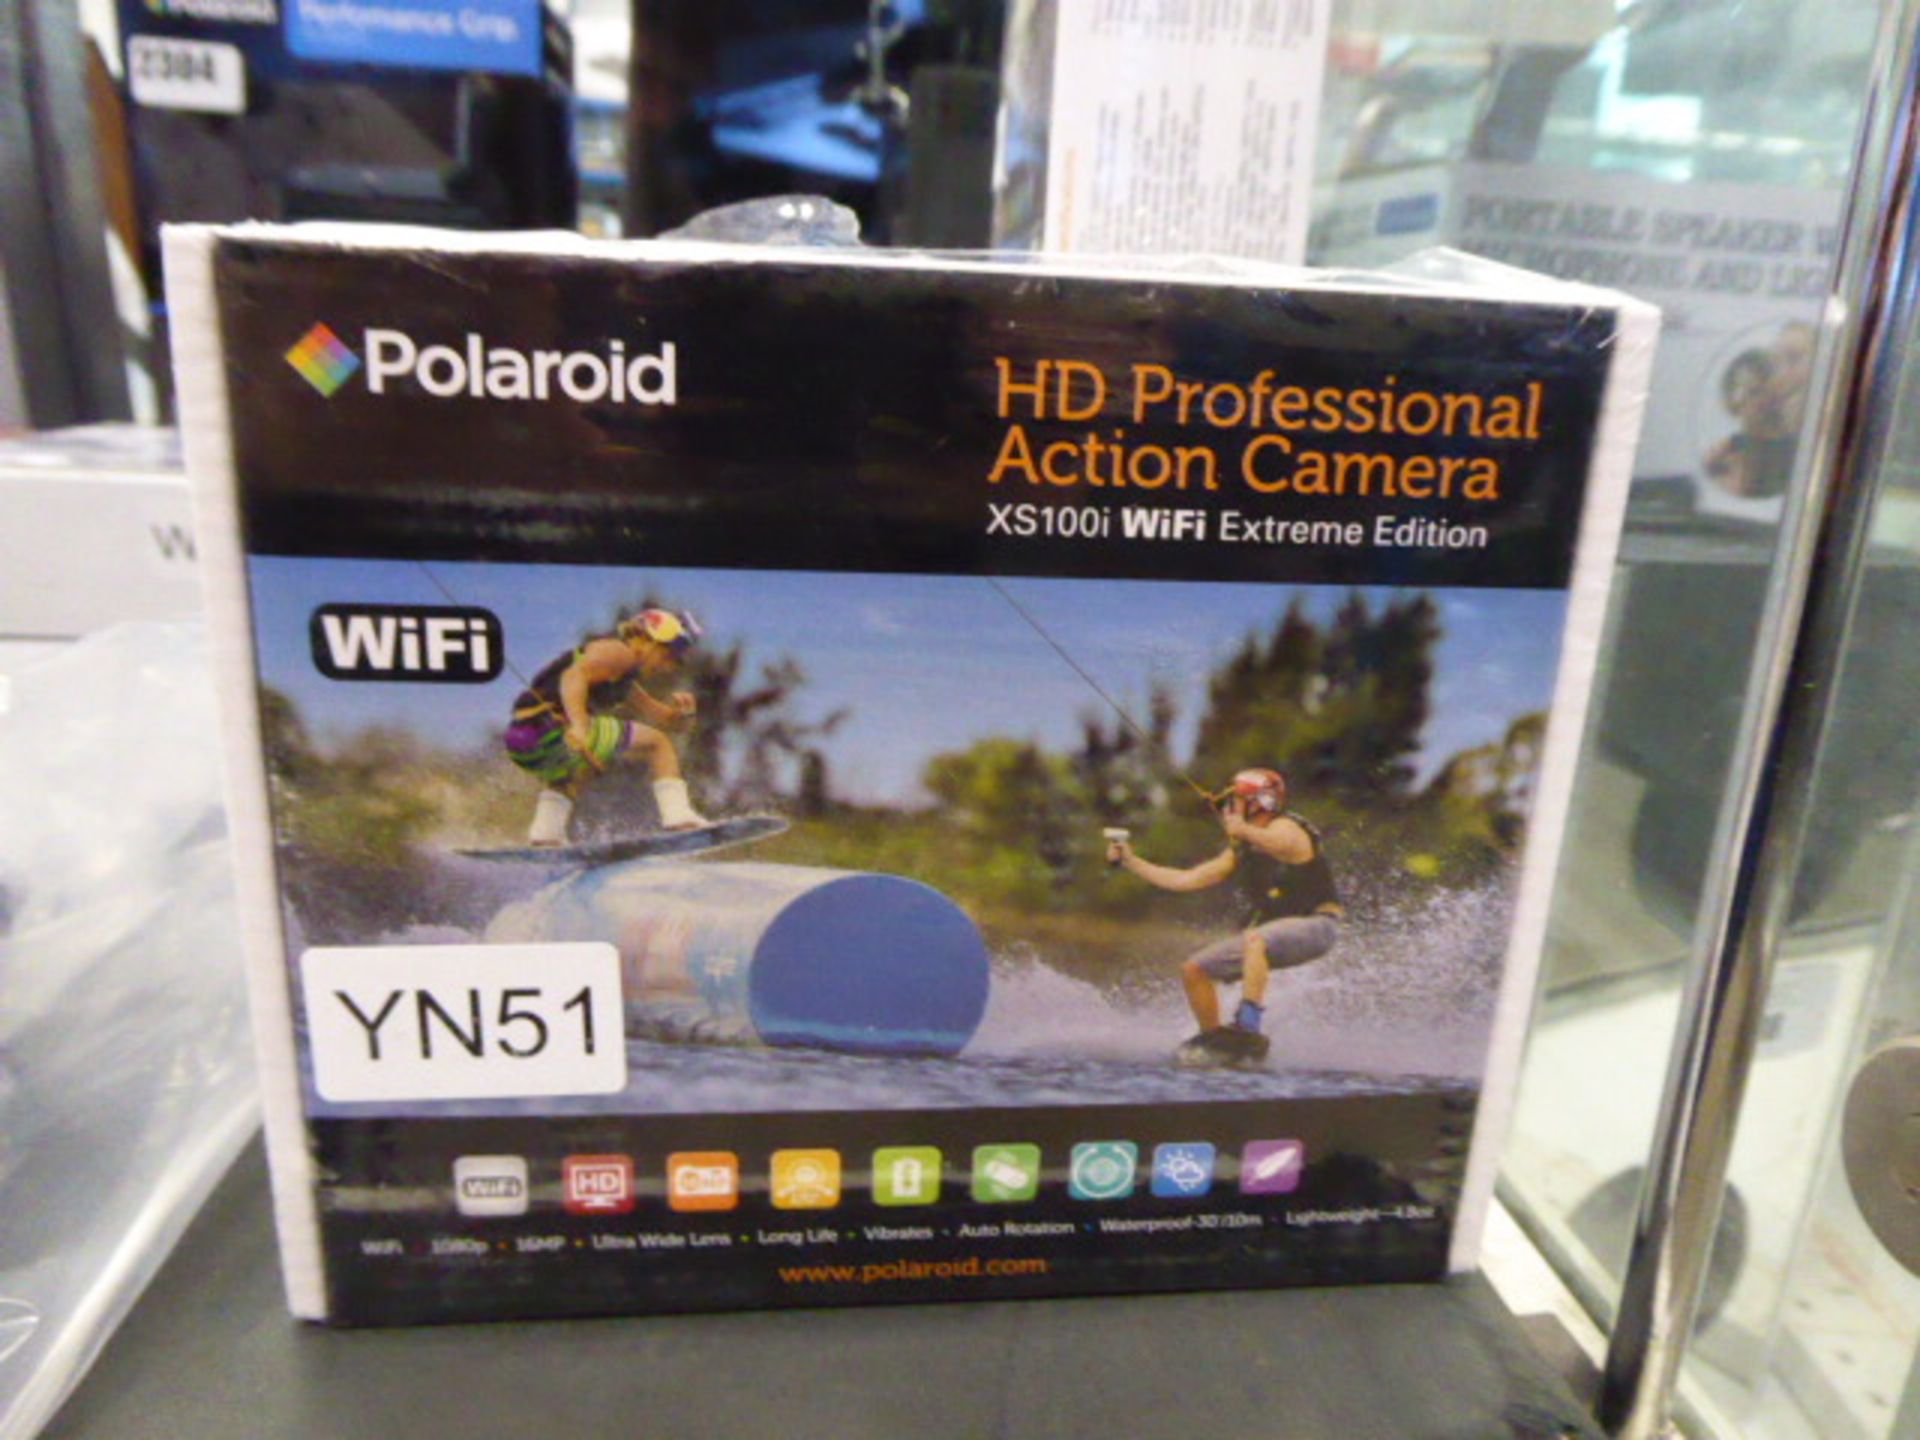 HD Professional action camera model XS100I (wi-fi edition) in box